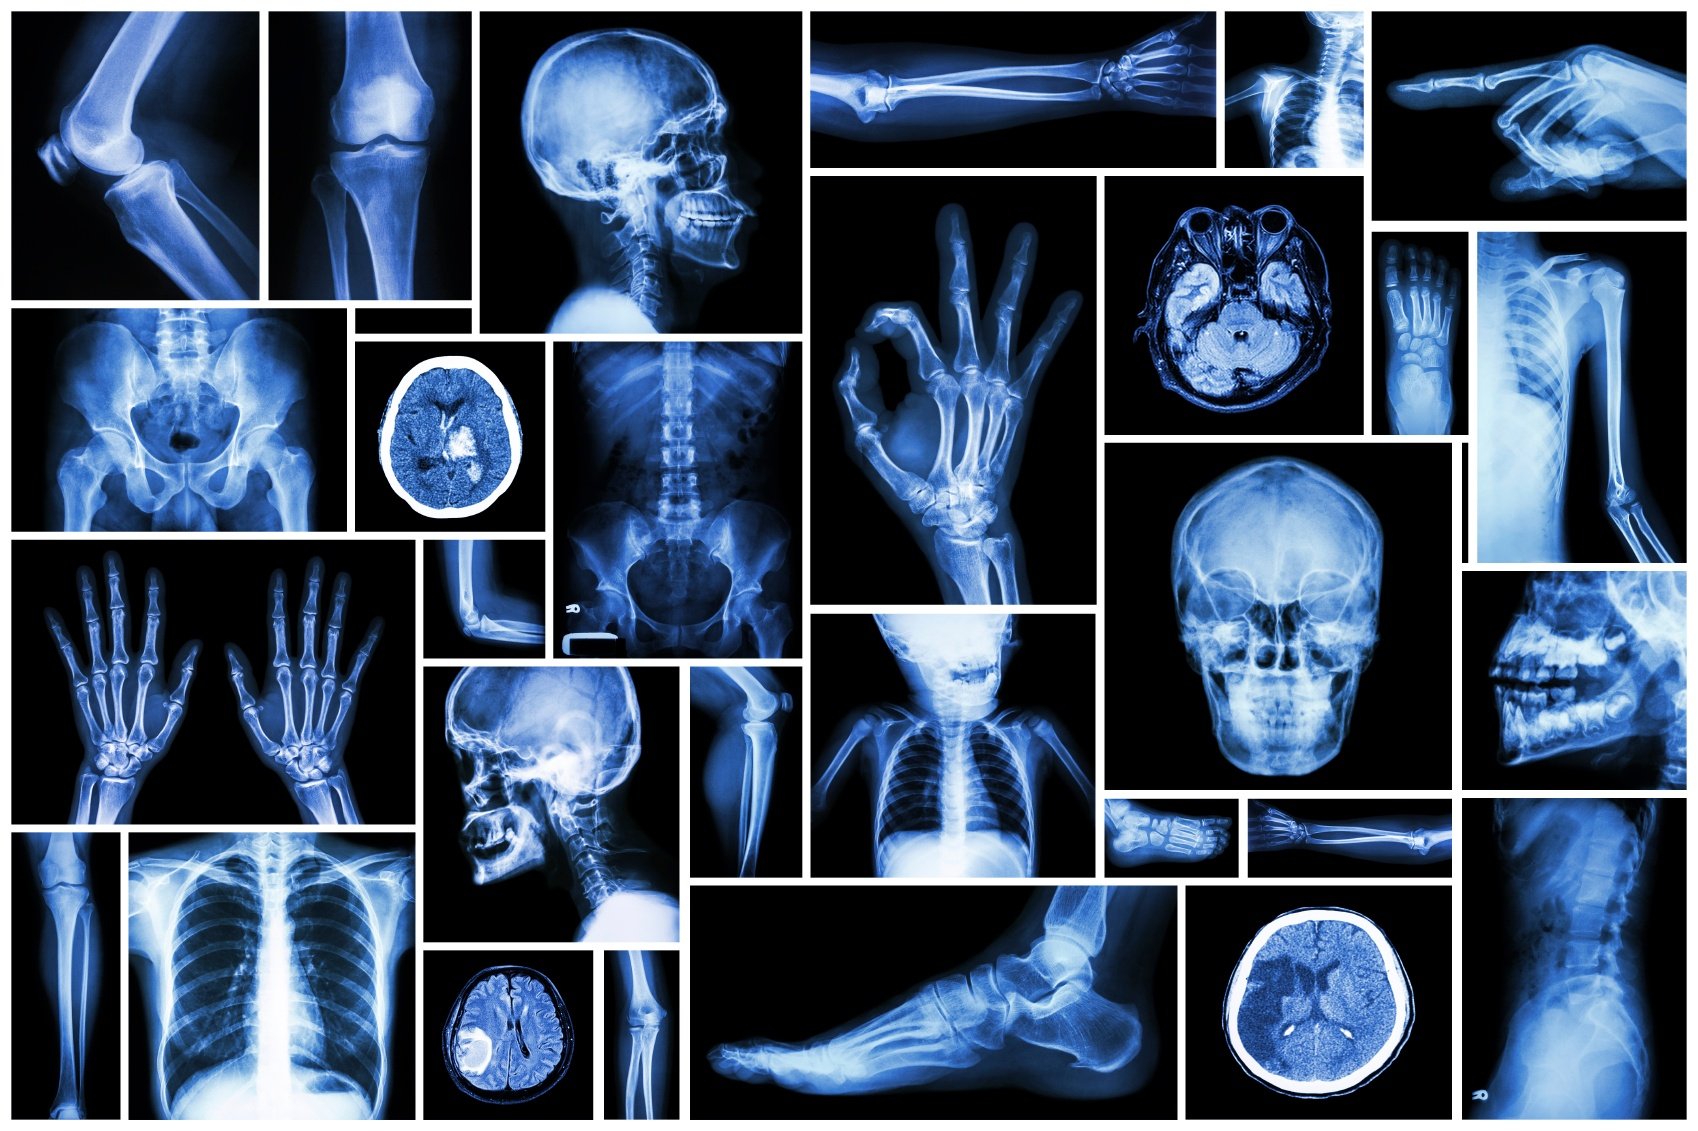 x-ray-scans-of-different-body-parts